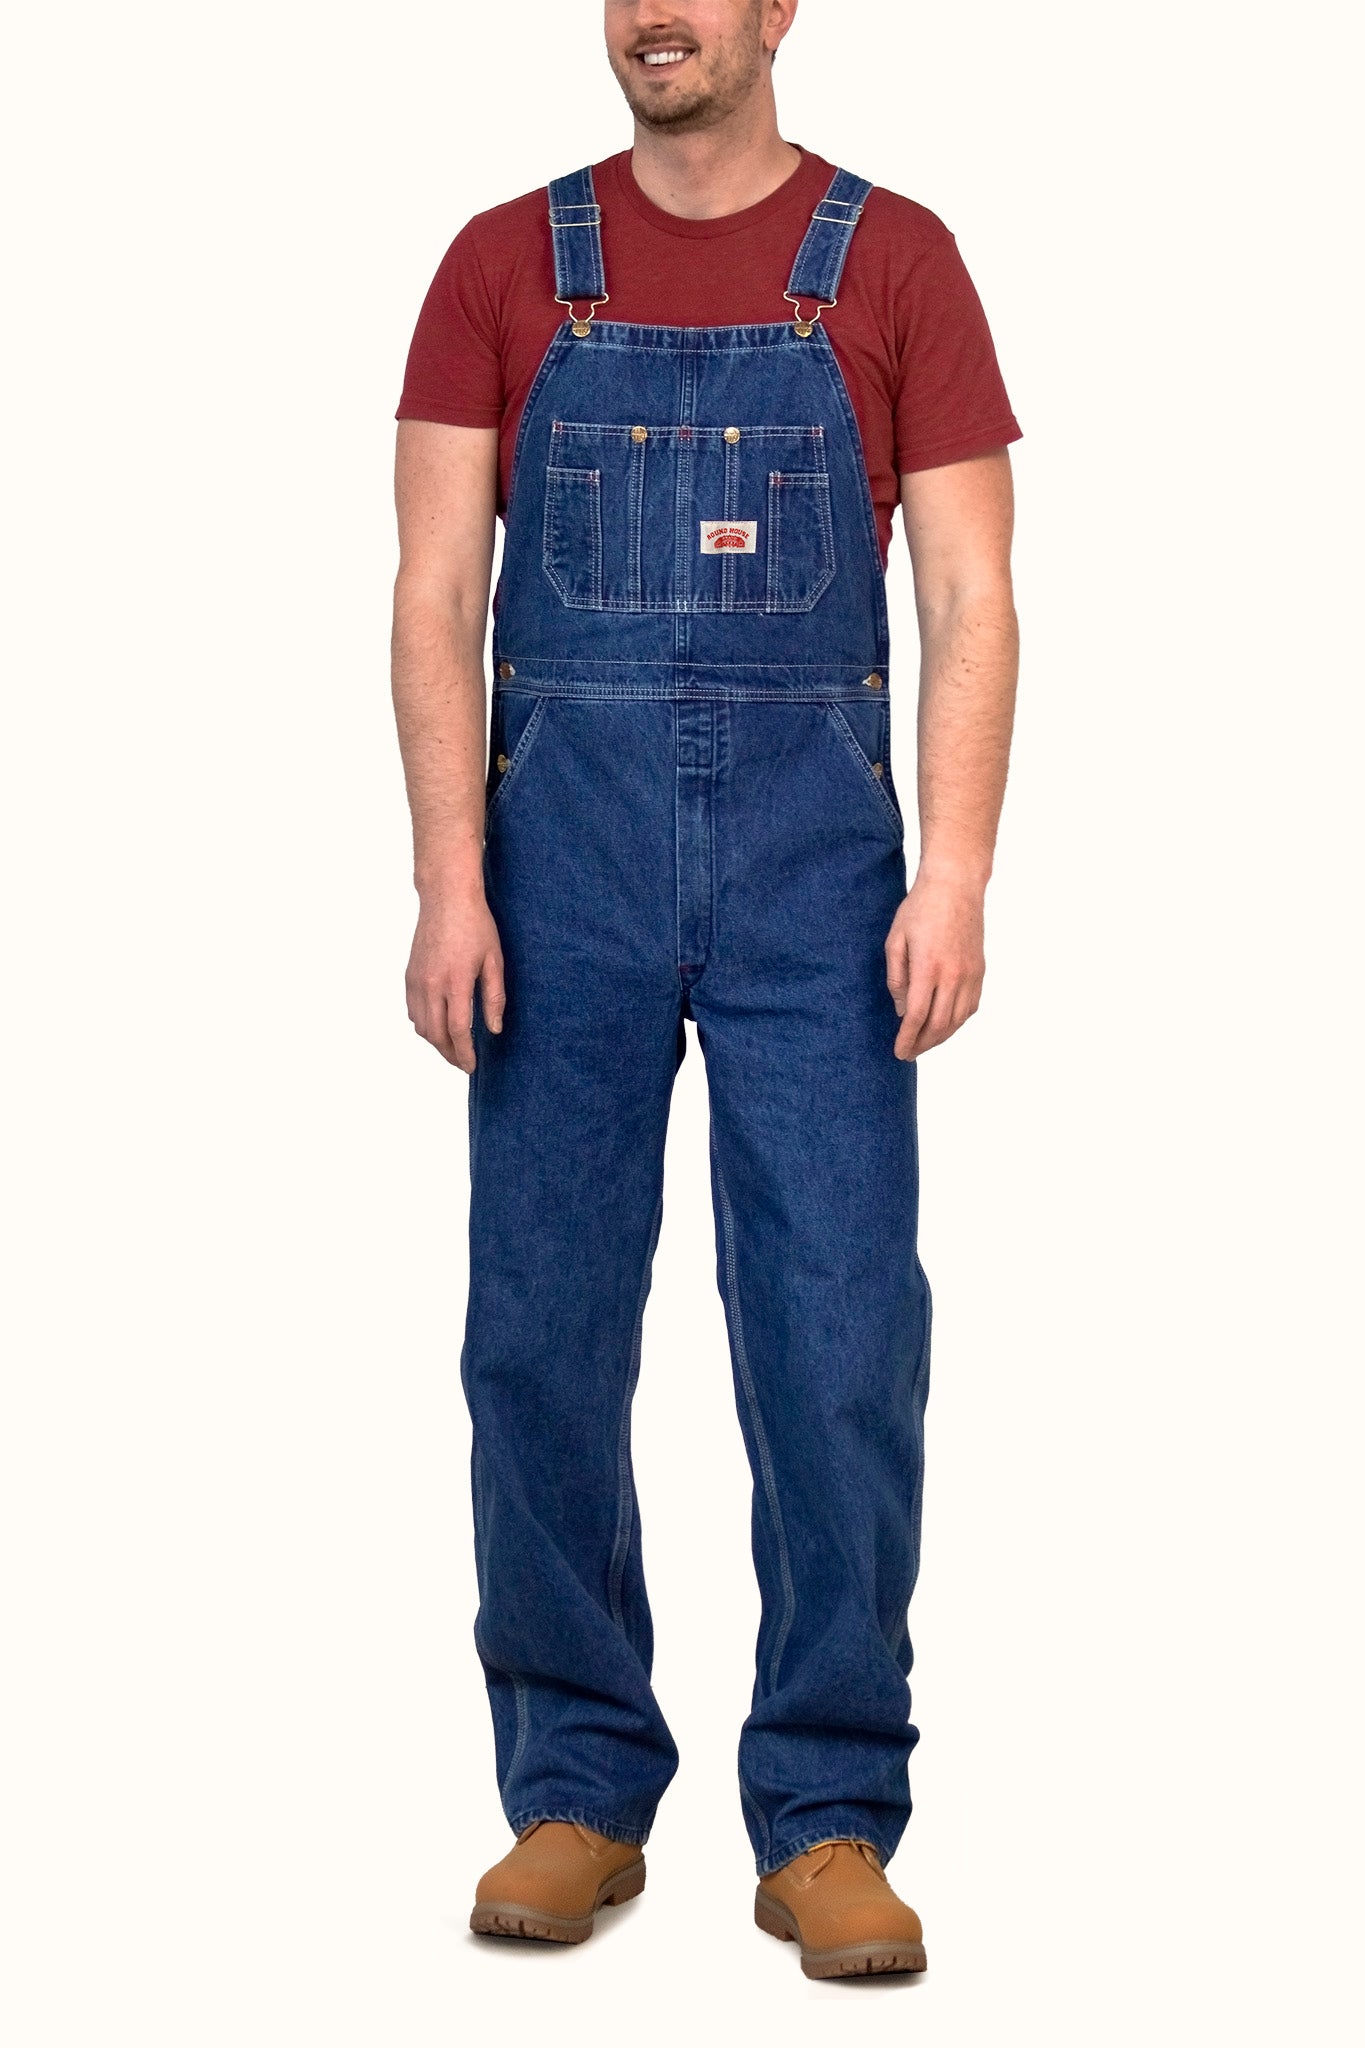 Overalls for All, kendi everyday